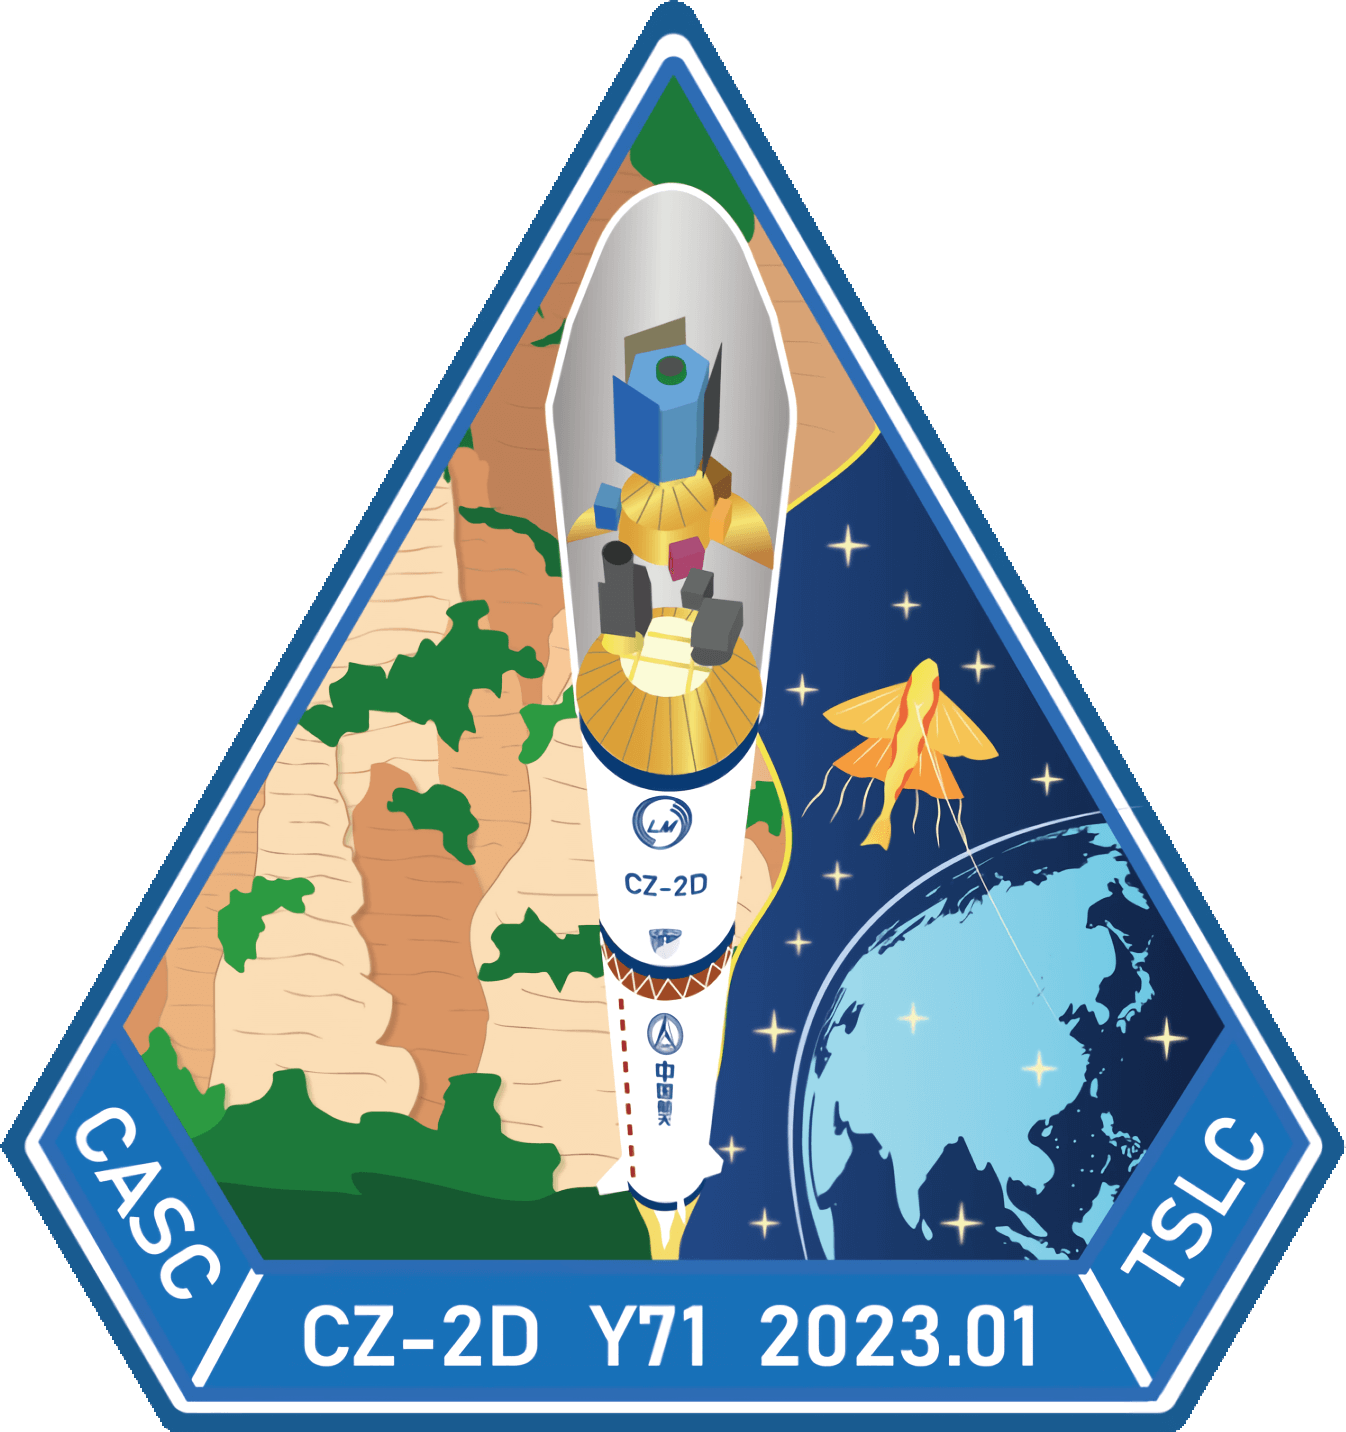 Mission patch for 6 x Jilin-1, Qilu-2/3 & others